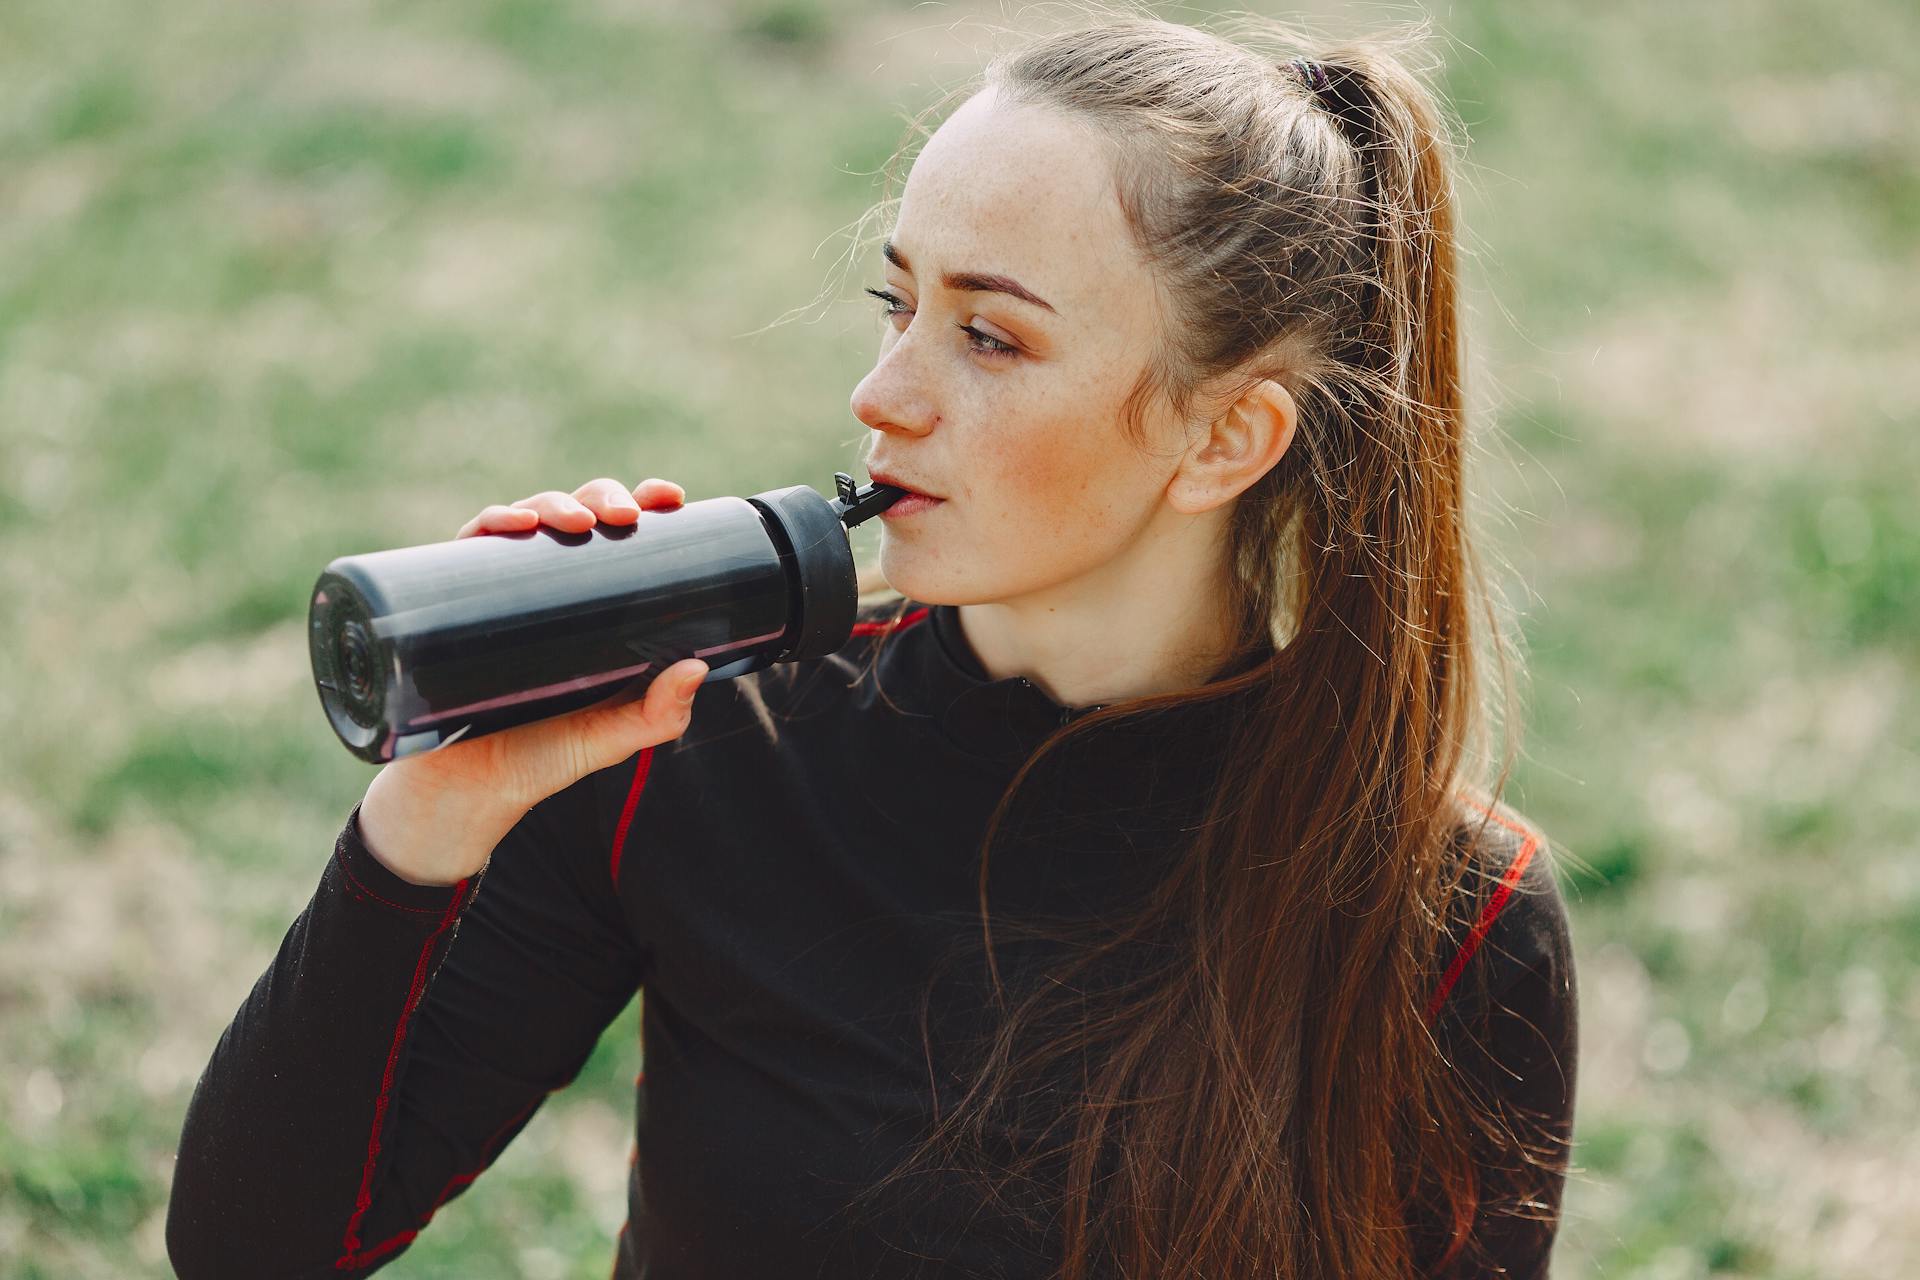 A woman drinking water from a water bottle | Source: Pexels